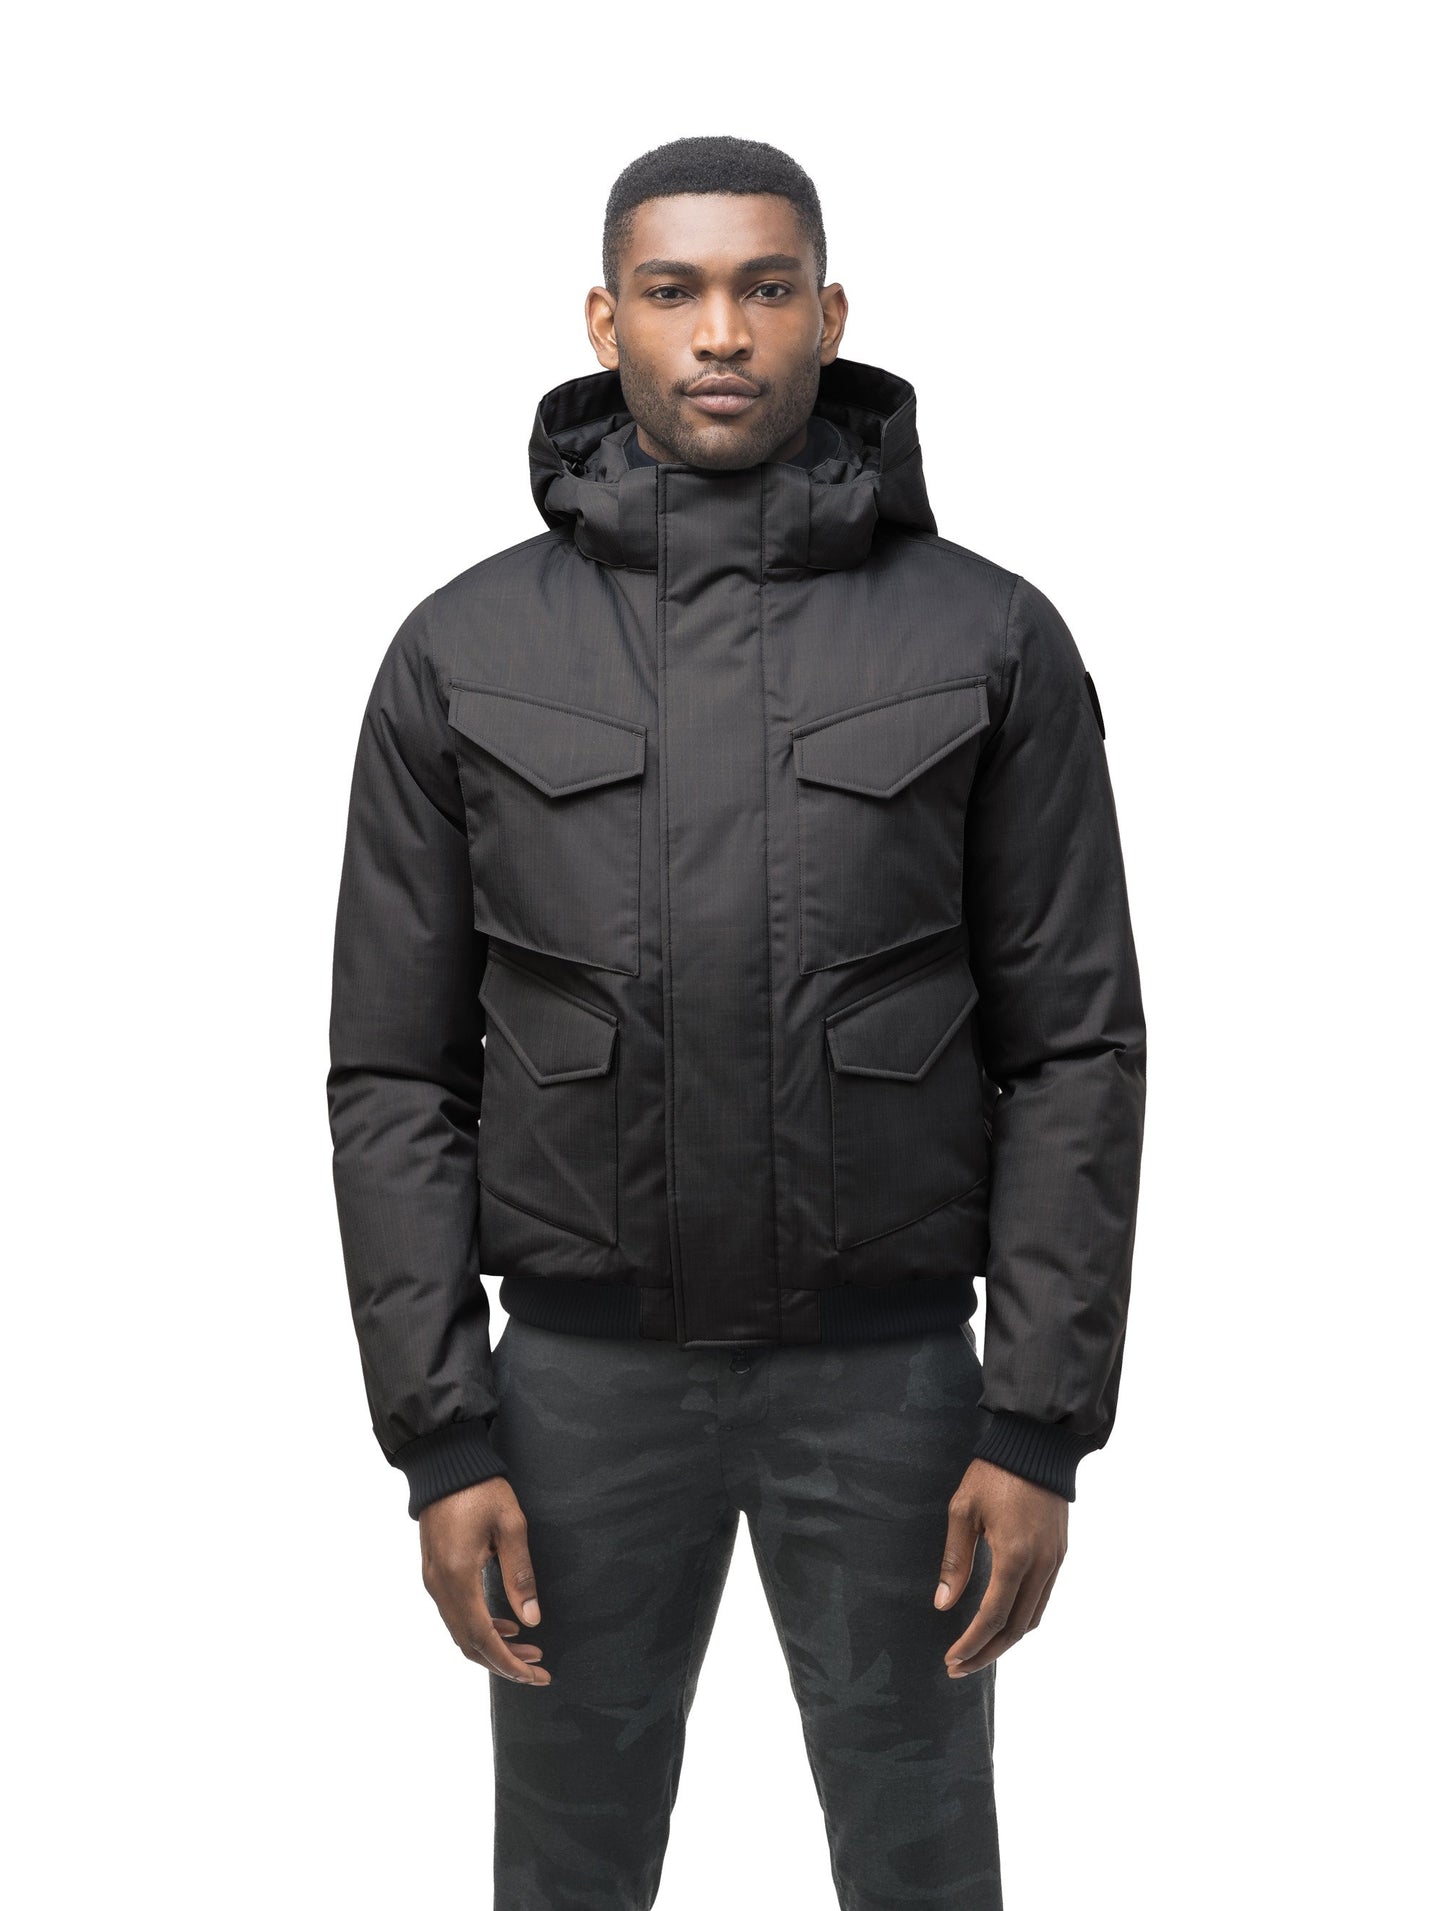 Men's waist length bomber with four huge pockets on the front in Black